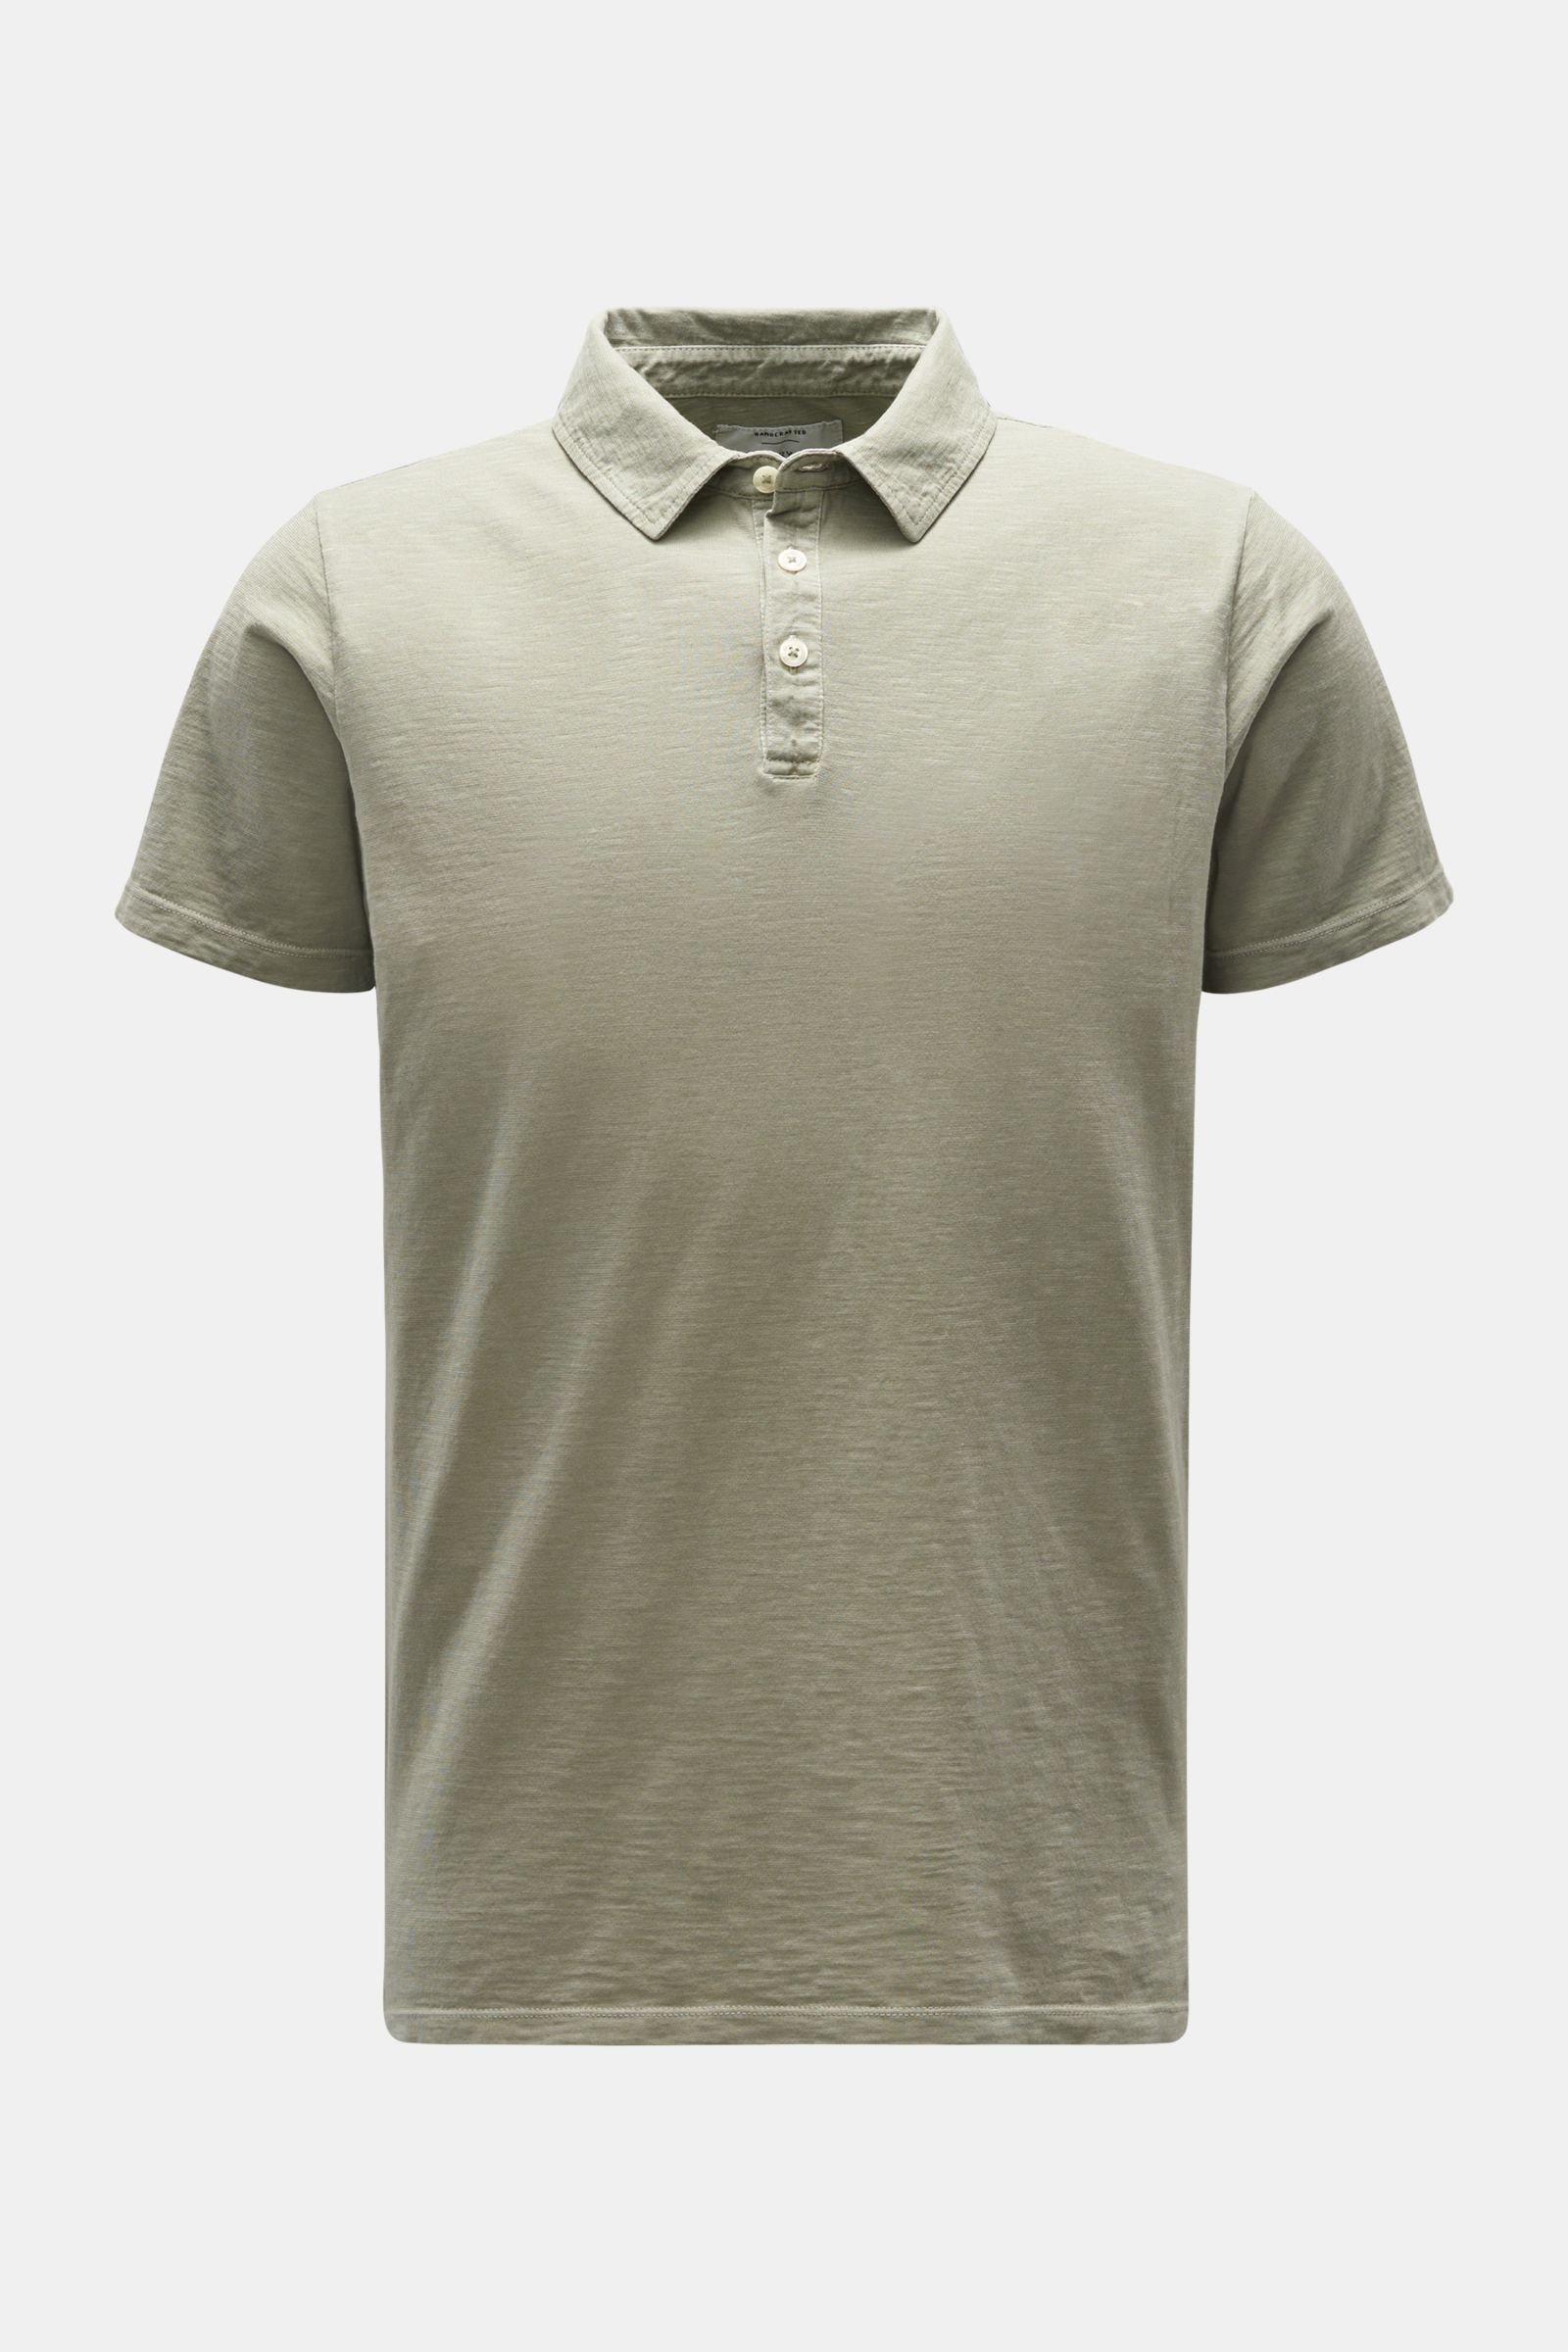 Jersey polo shirt olive